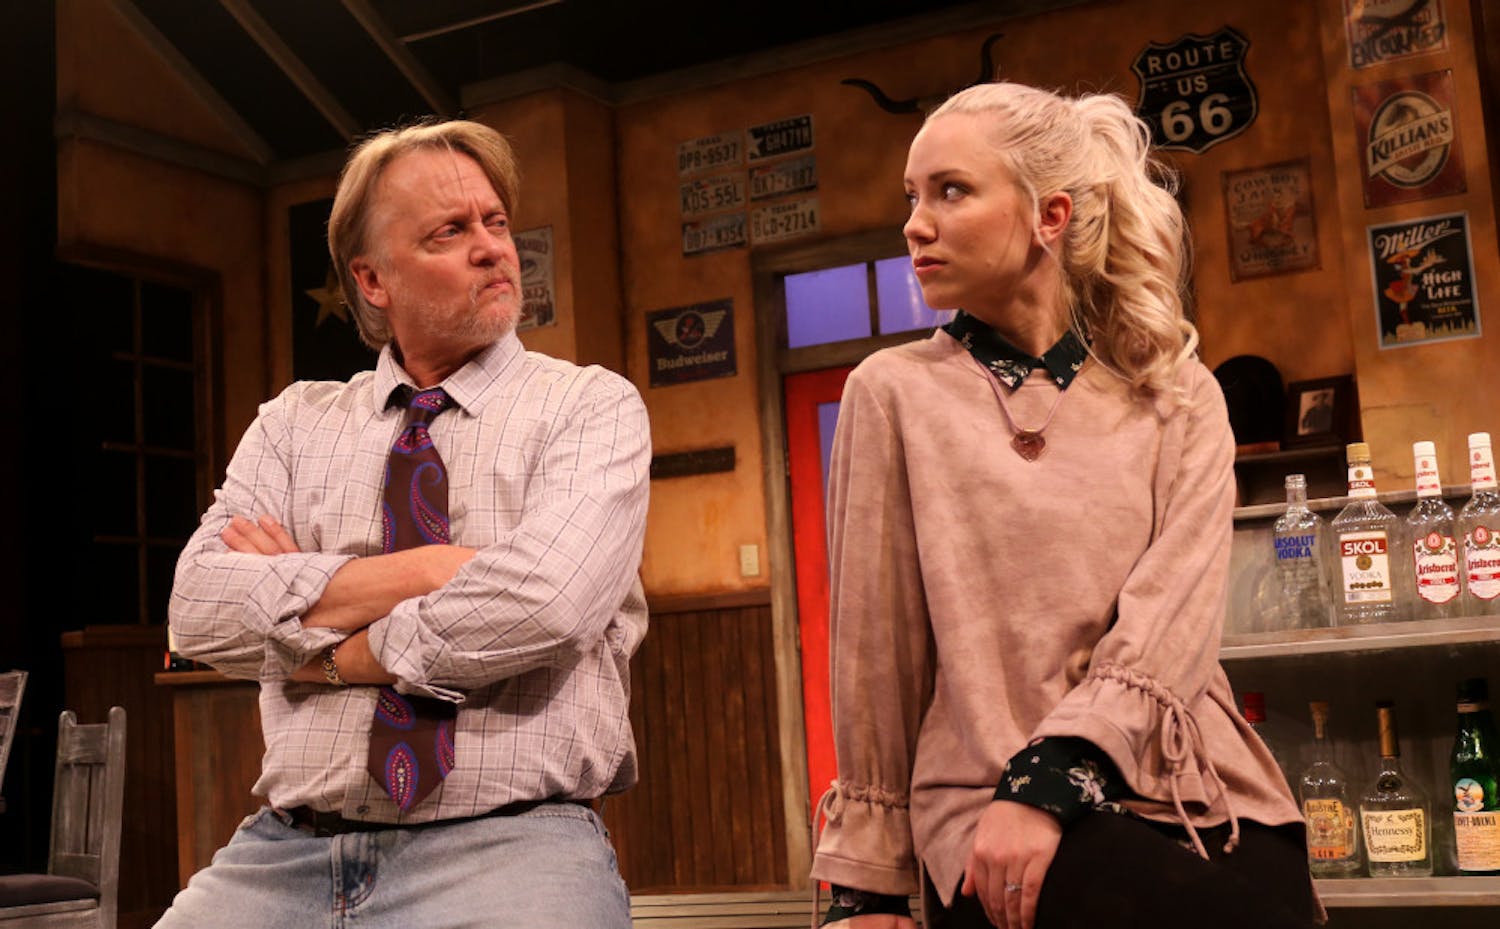 Bryan Mercer and Marissa Toogood play Walter and Marley in the Hippodrome's "Lone Star Spirits." The two characters have a strained father-daughter relationship, which is one of the key focal points of the play.  